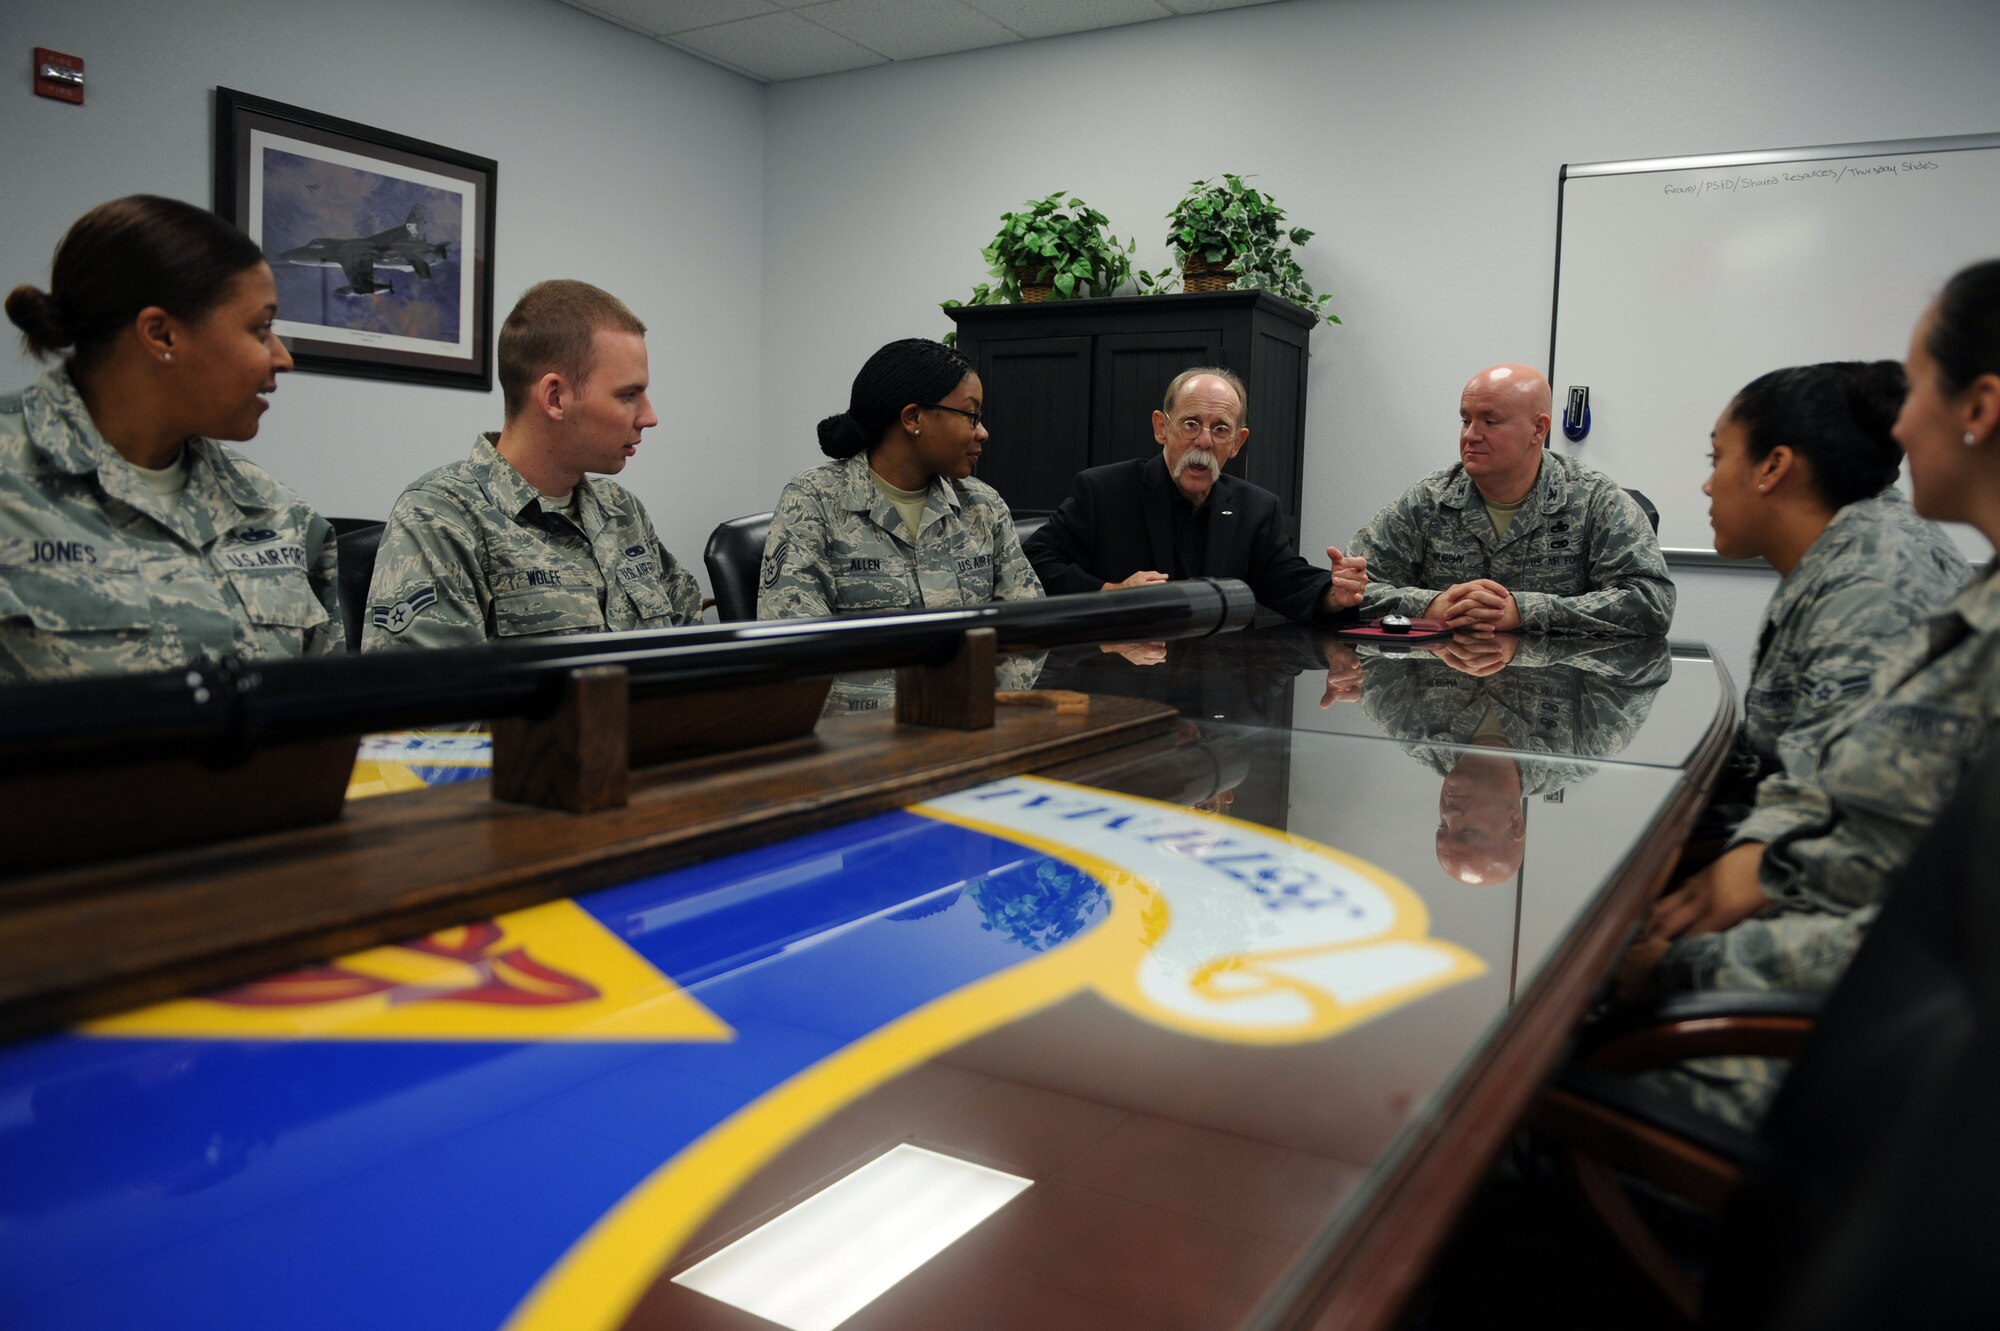 U.S. Air Force Airmen from the 355th Maintenance Group sit with John Eslinger, 355th MXG honorary commander, as they discuss an upcoming group event at Davis-Monthan Air Force Base, Ariz., Sept. 5, 2013. The intent of D-M's Honorary Commander program is to educate community leaders on the inner workings of the base and the Air Force as a whole. (U.S. Air Force photo by Airman 1st Class Saphfire Cook/Released) (cropped)